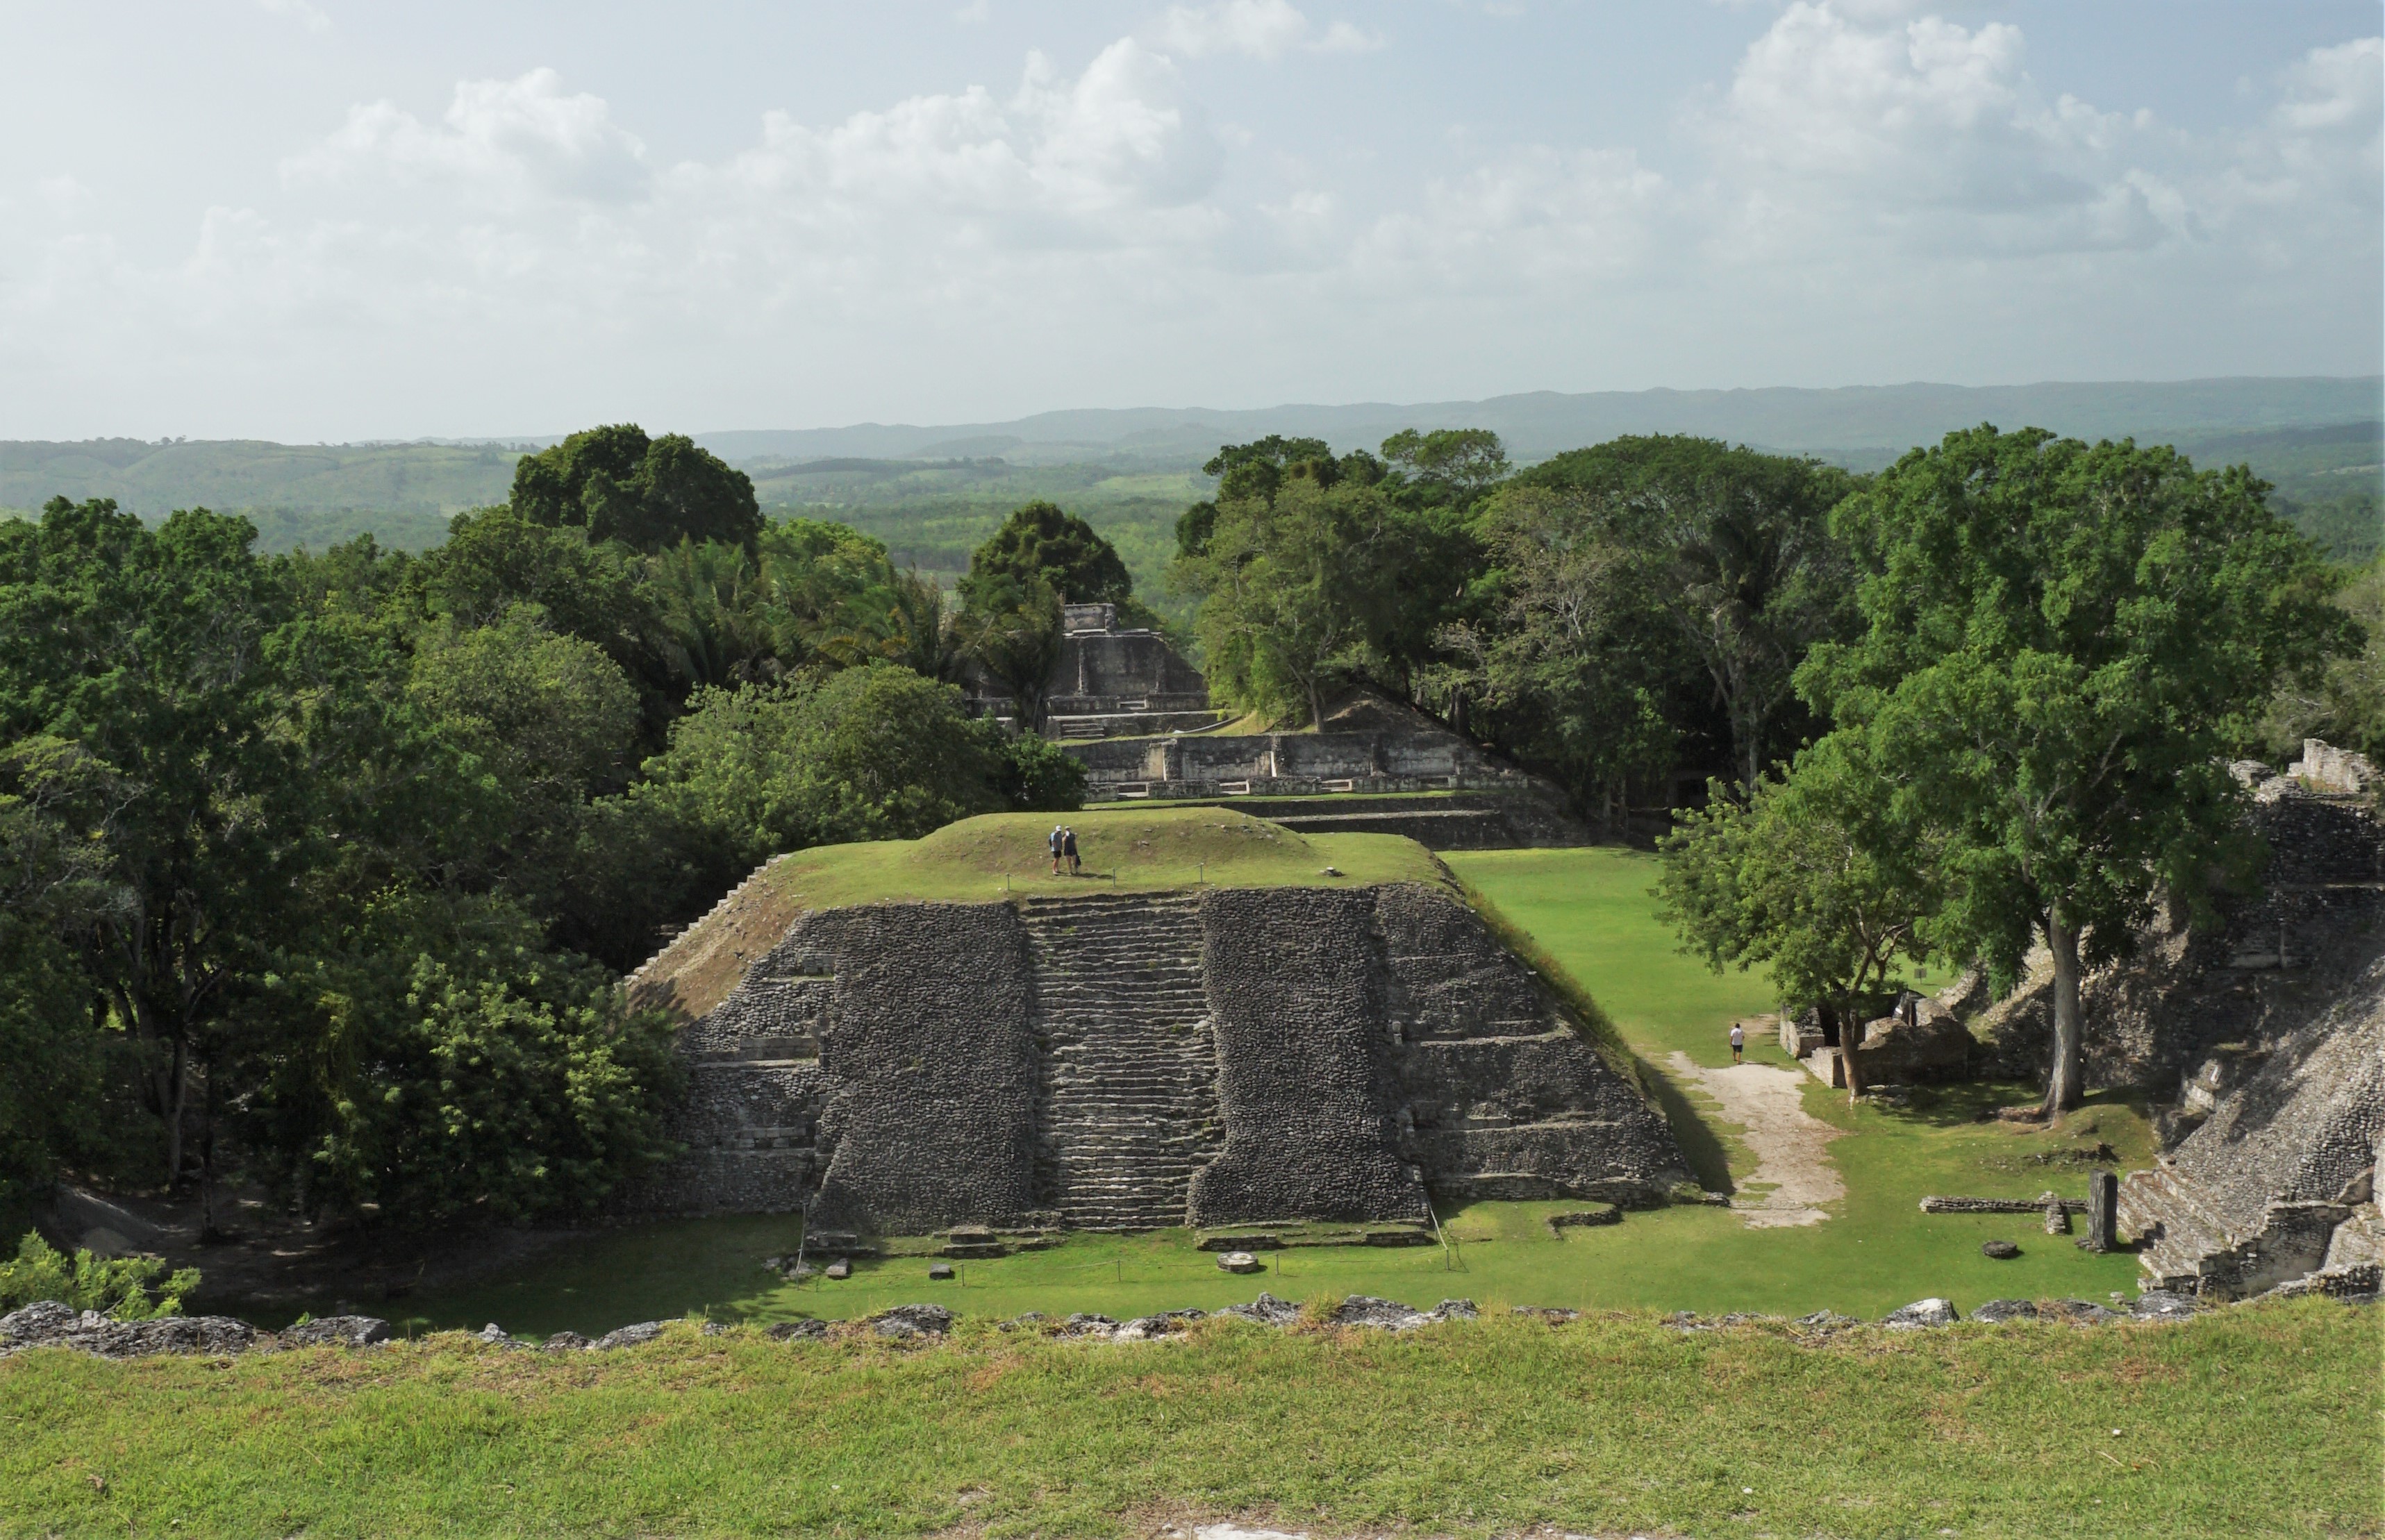 View of Xunantunich Mayan Ruins in Belize from Castillo